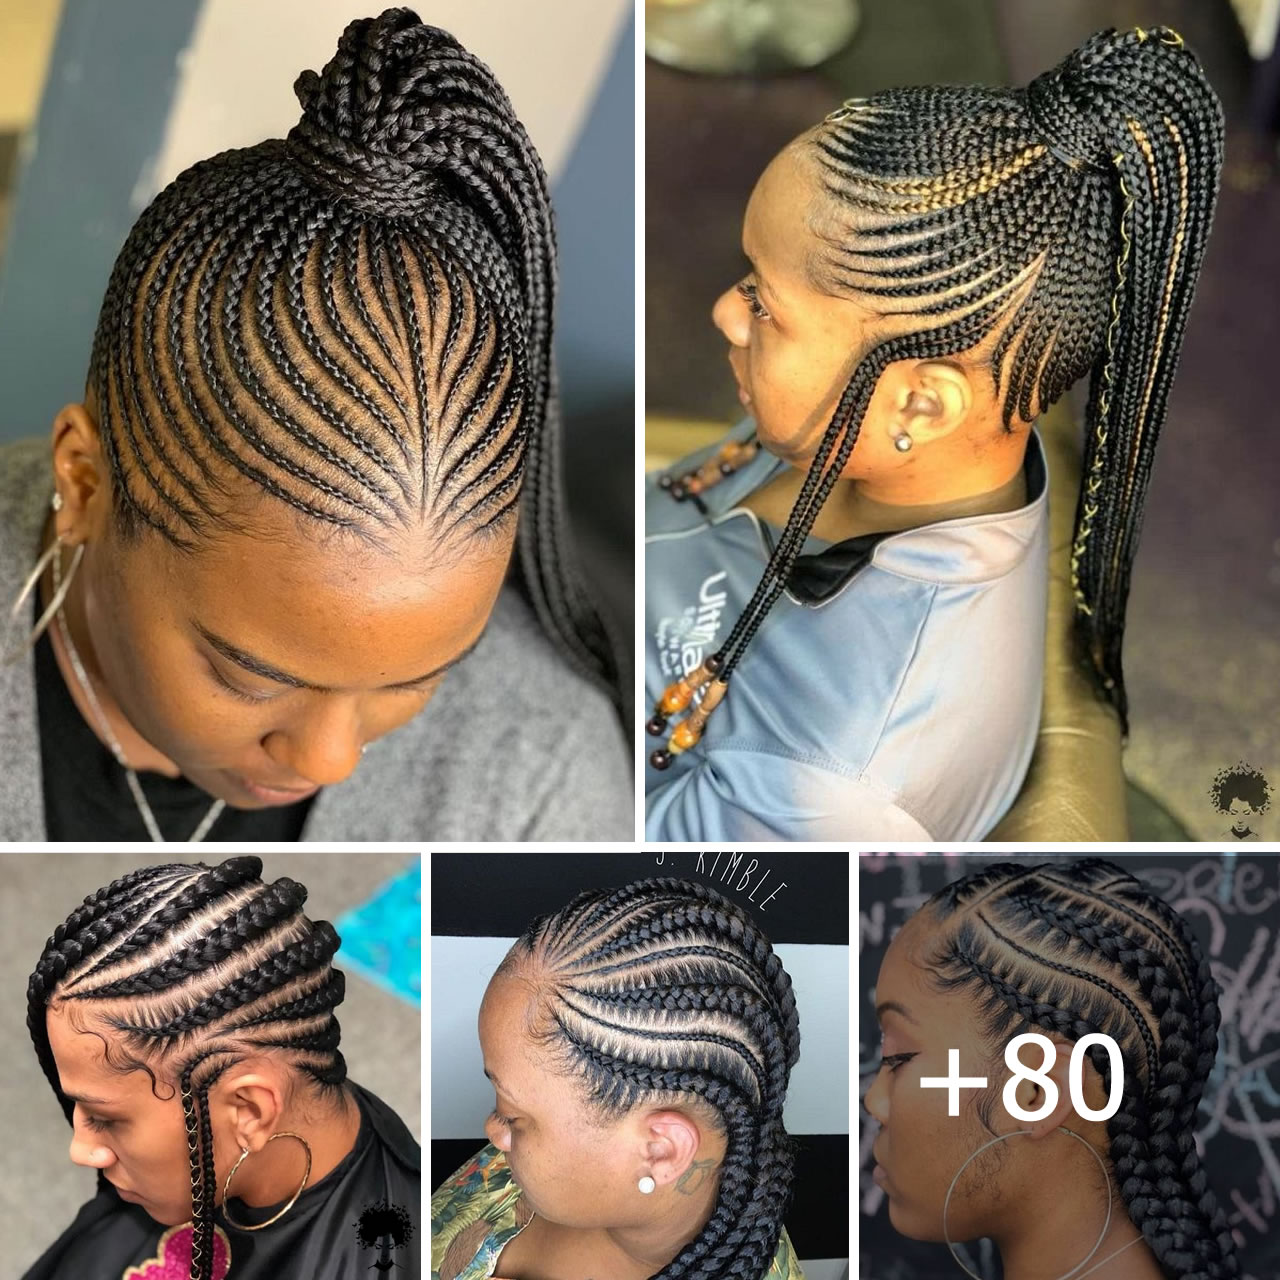 80 Braided Hairstyles You Need to Try